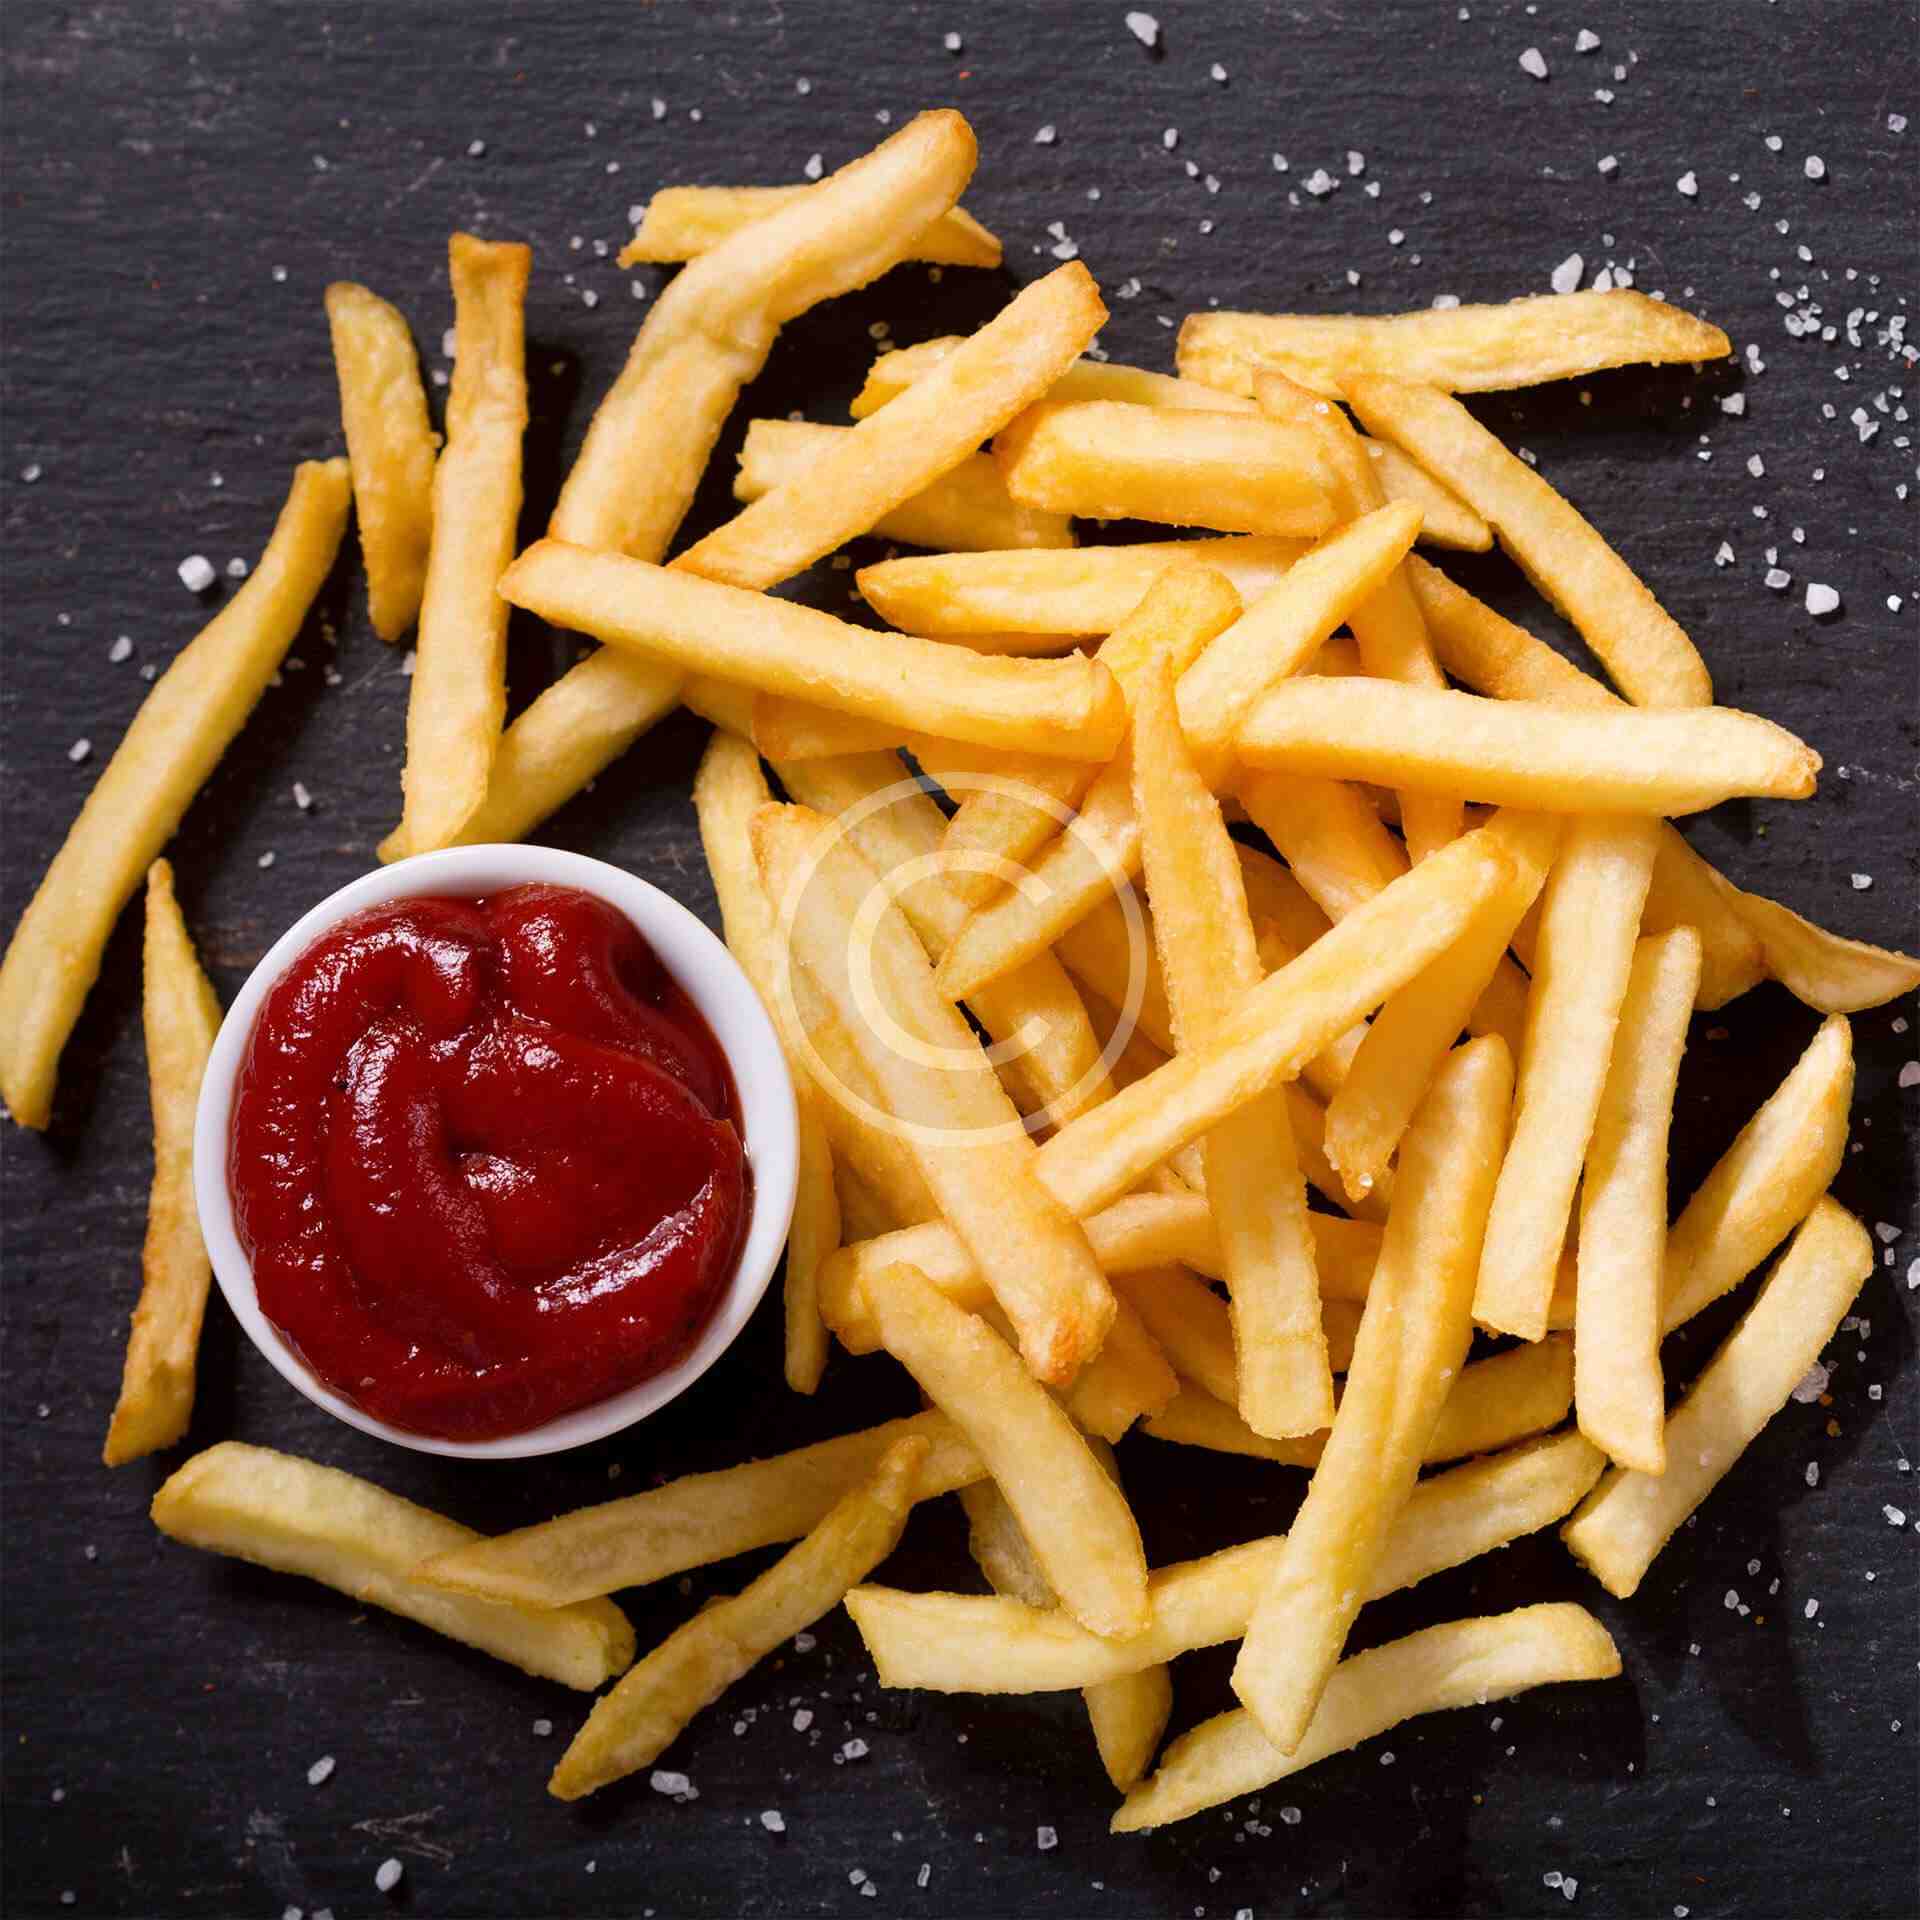 Hot french fries